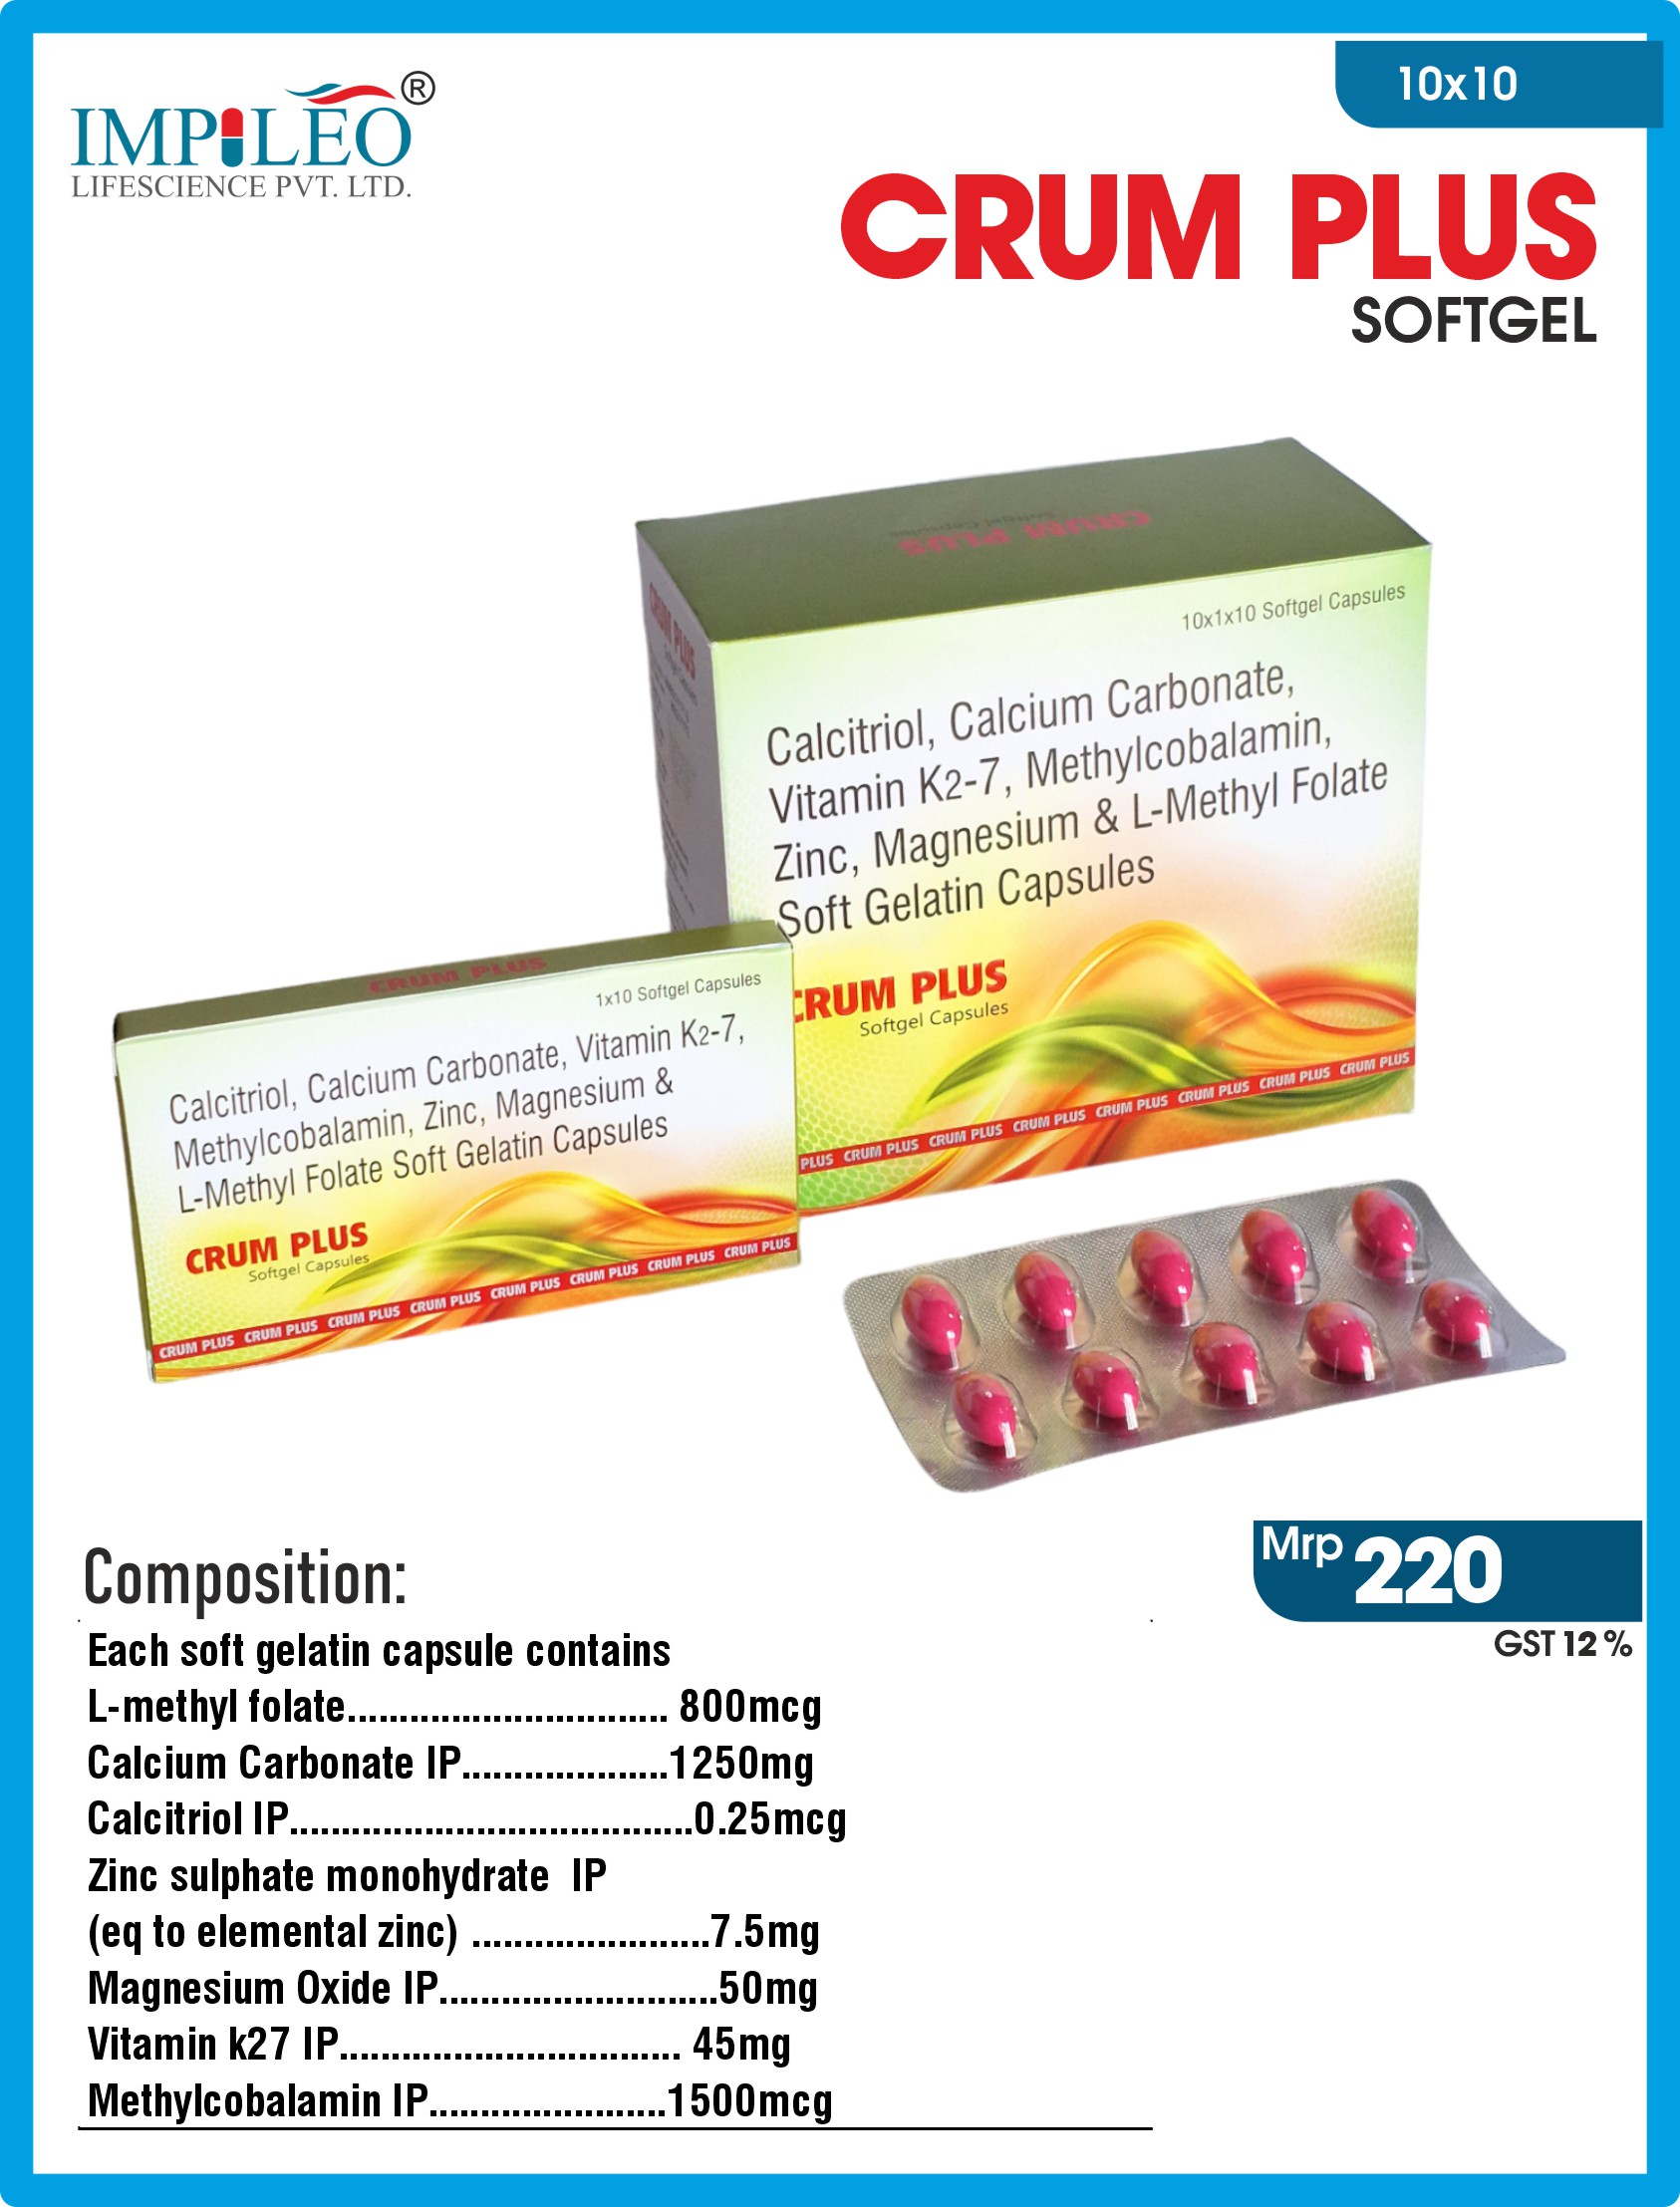 Secure Growth Strategies: Third-Party Manufacturing in Baddi Offers CRUMPLUS Softgel Capsules